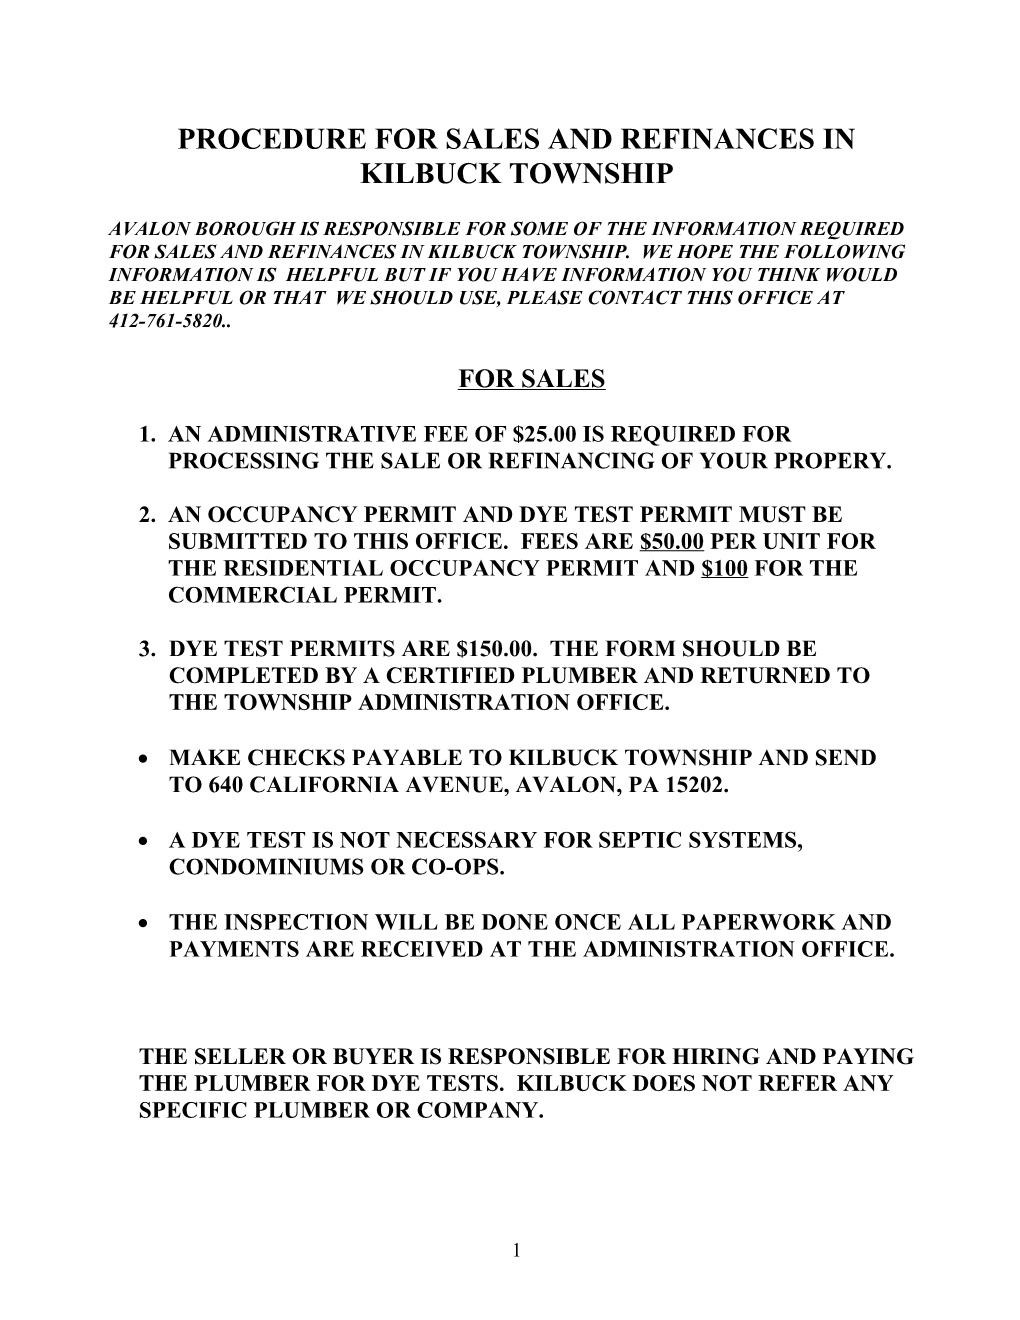 Procedure for Sales and Refinances in Kilbuck Township